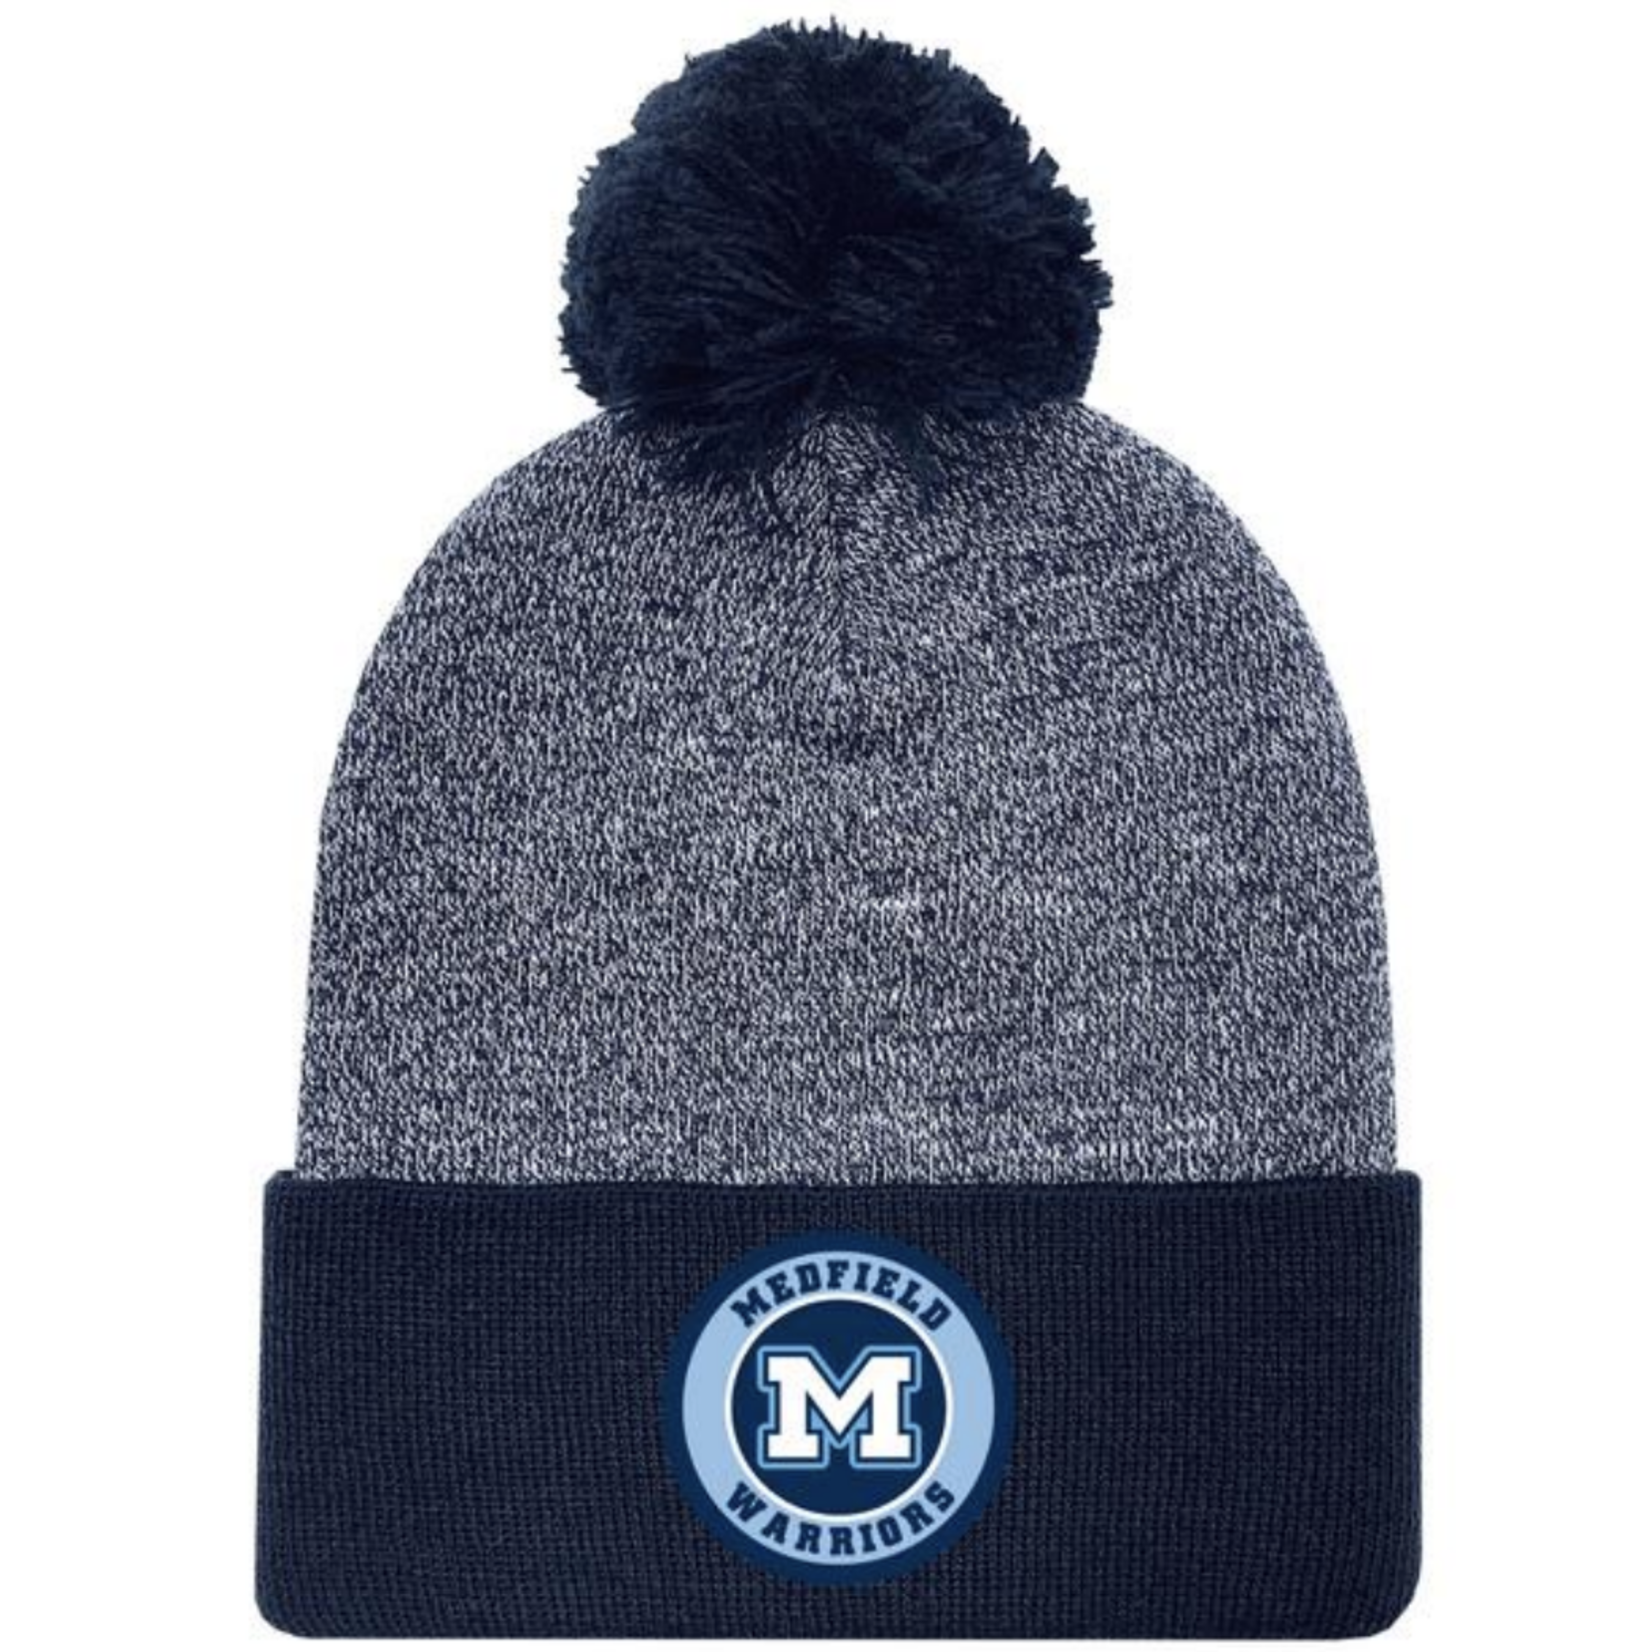 Legacy - Adult Knit Hats - Navy Marled with Medfield Circle - Pom Cuffed